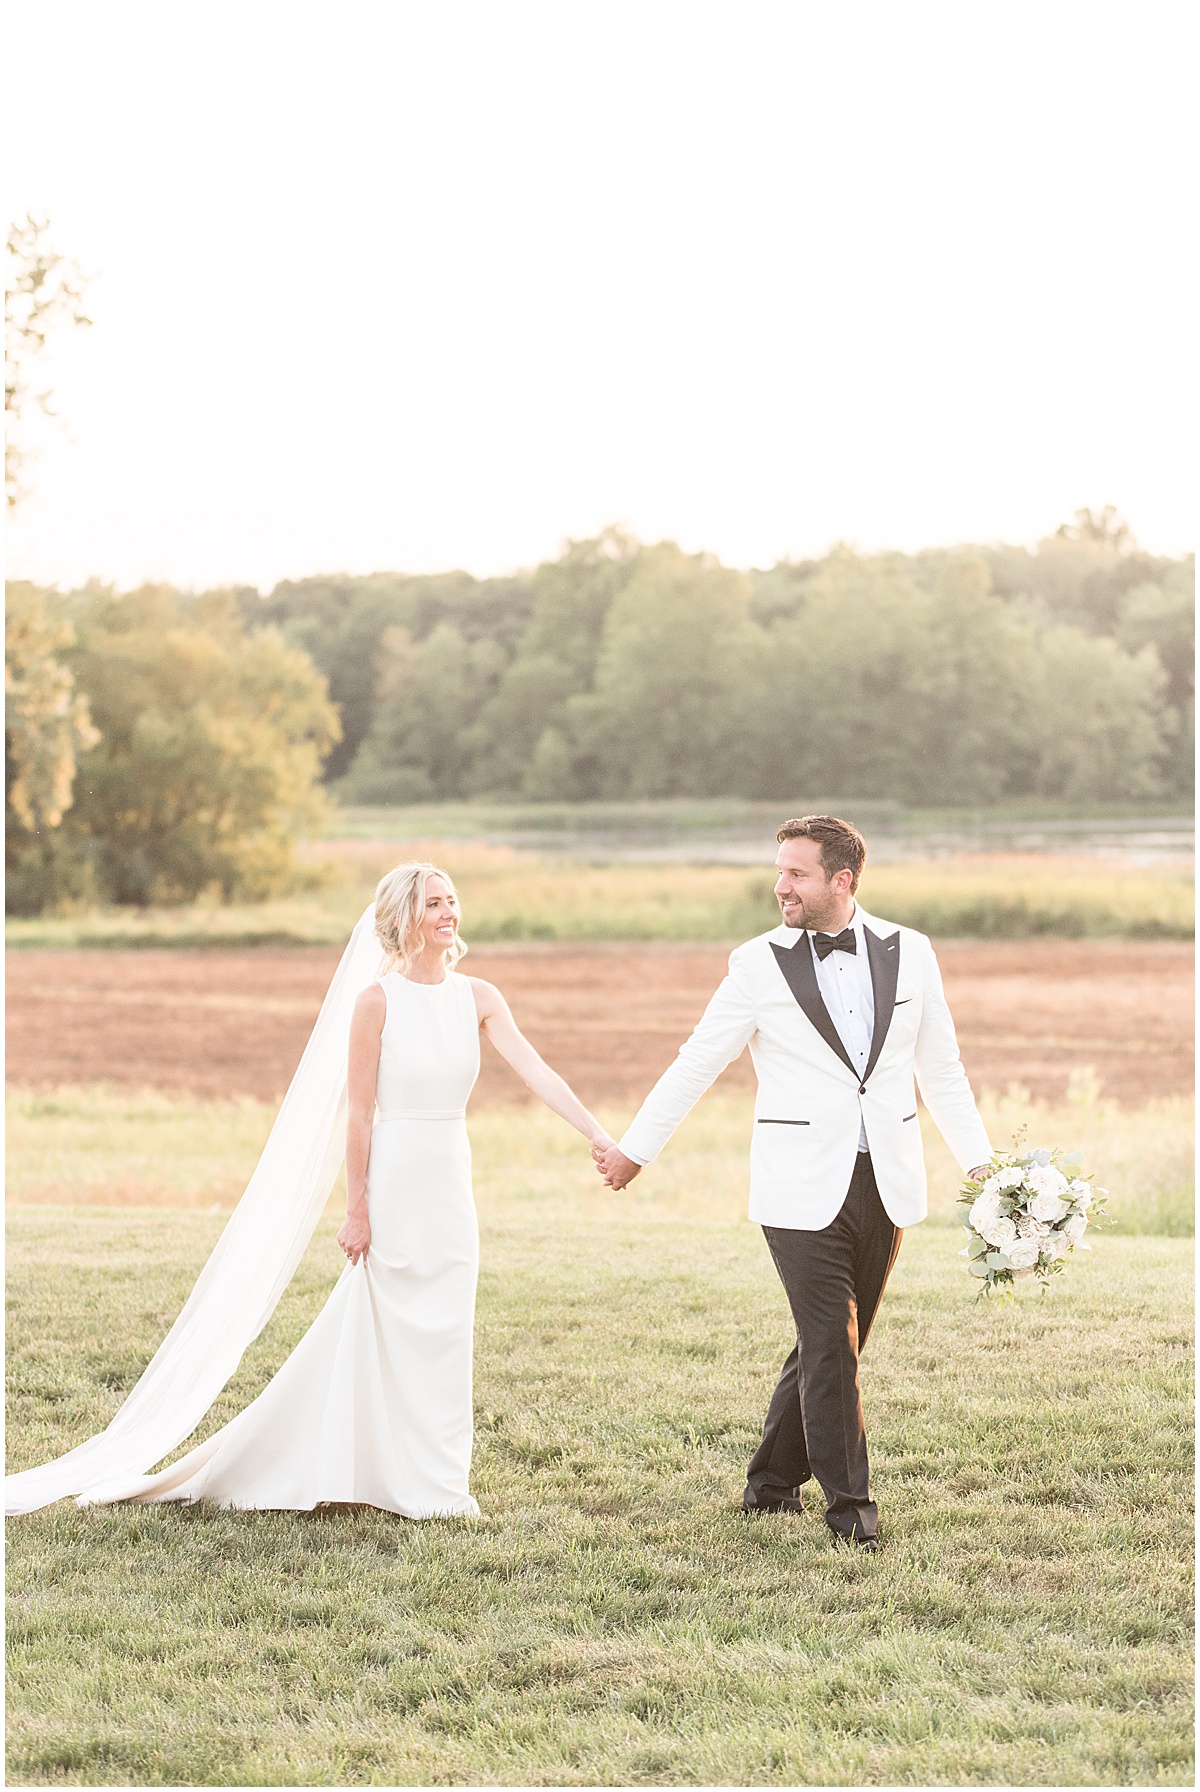 Sunset photos at an outdoor wedding with greenery in Rochester, Indiana